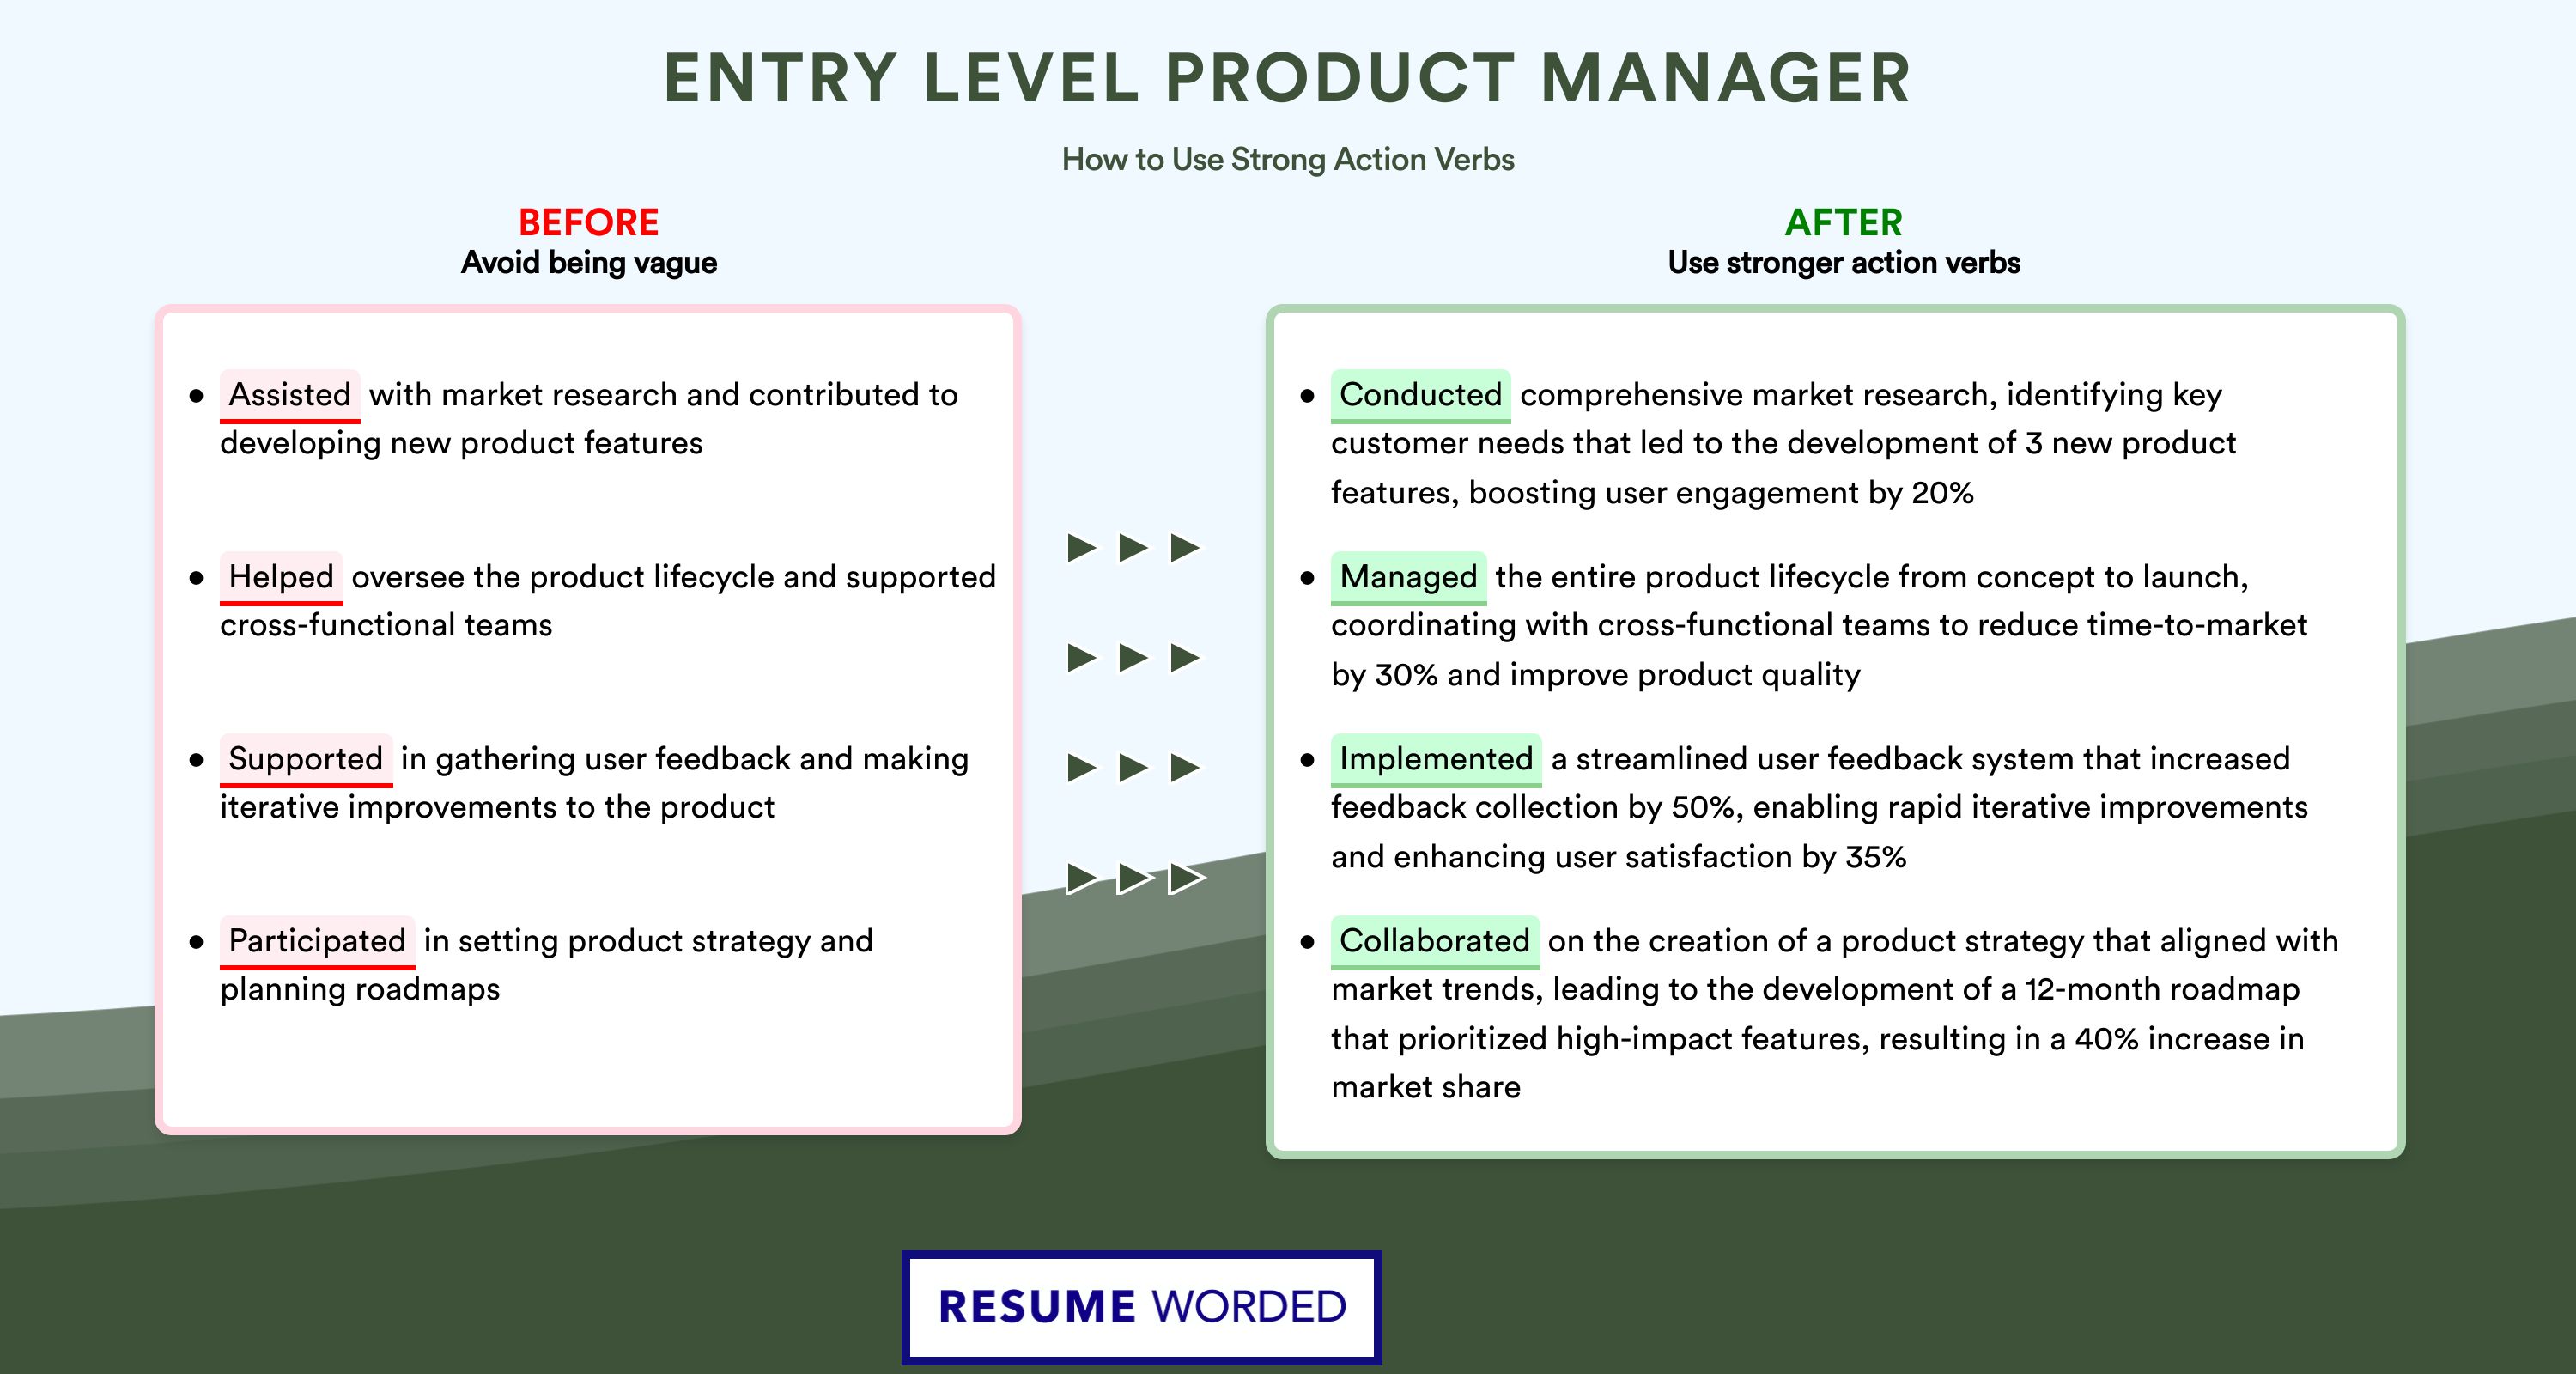 Action Verbs for Entry Level Product Manager